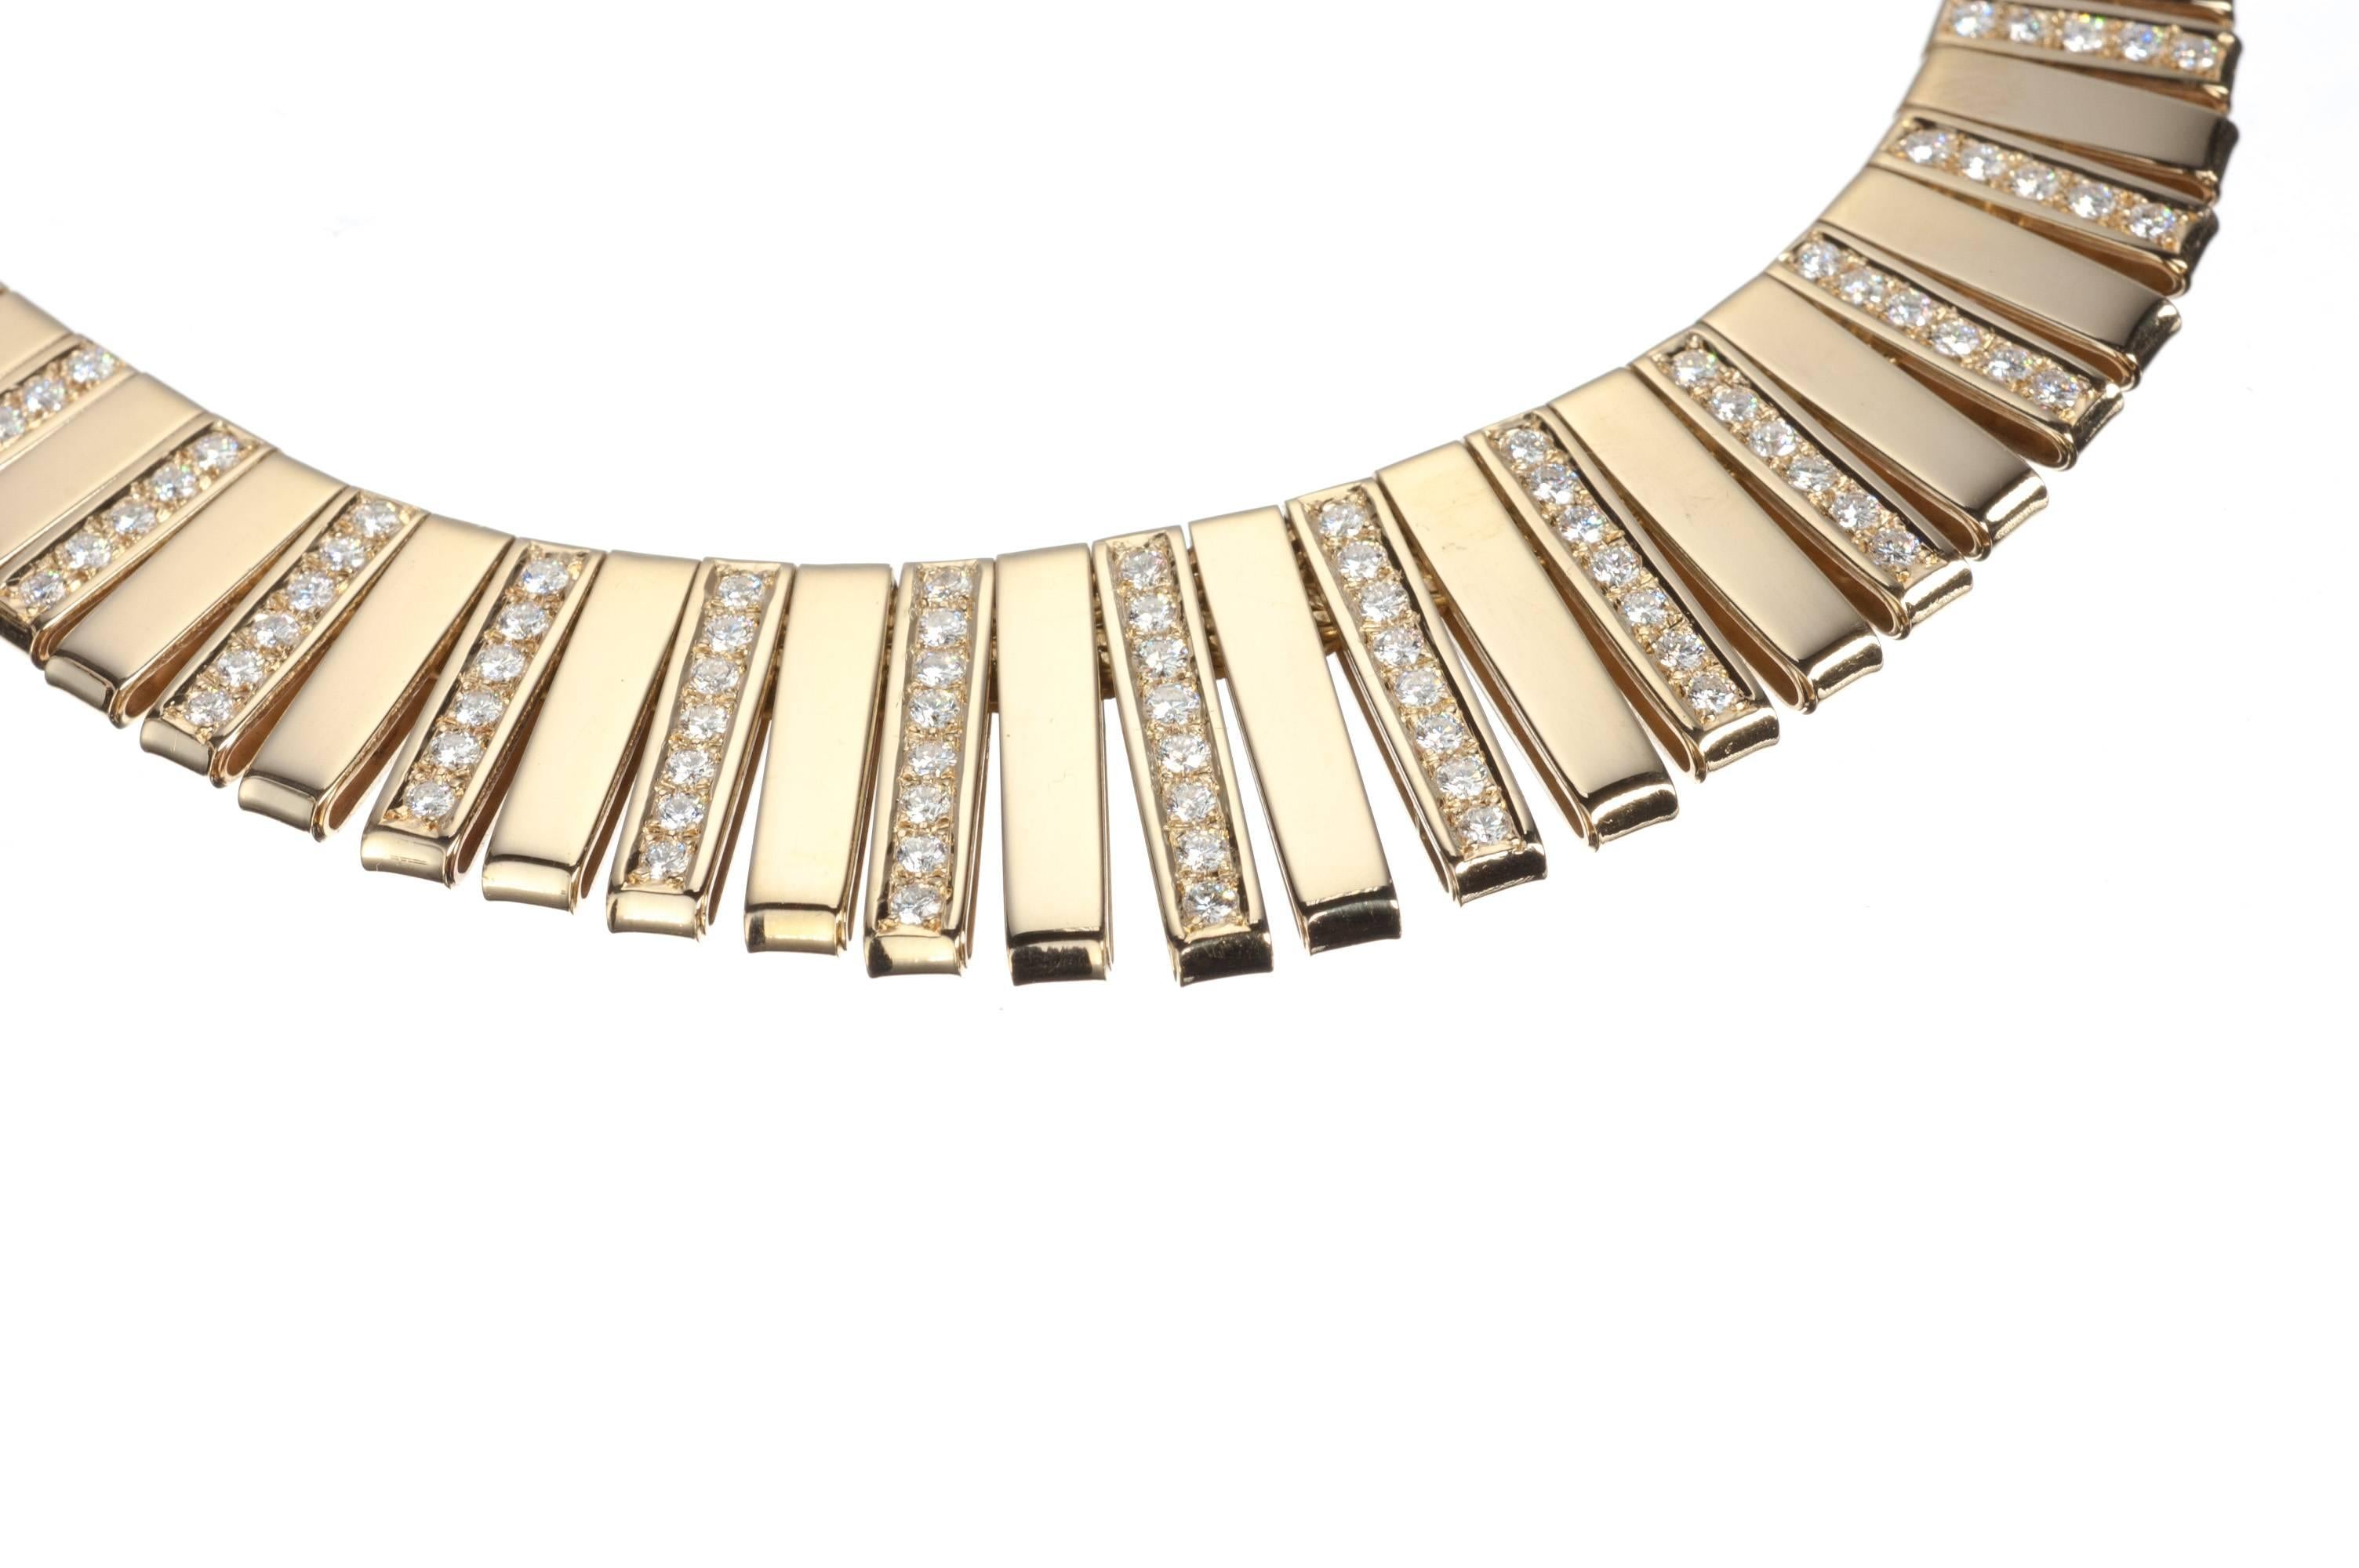 Graduated rays of 18-karat yellow gold alternate between rays set with white diamonds to create a flattering, dramatic necklace. Total diamond weight 2.77ct., 90 brilliant-cut round diamonds.